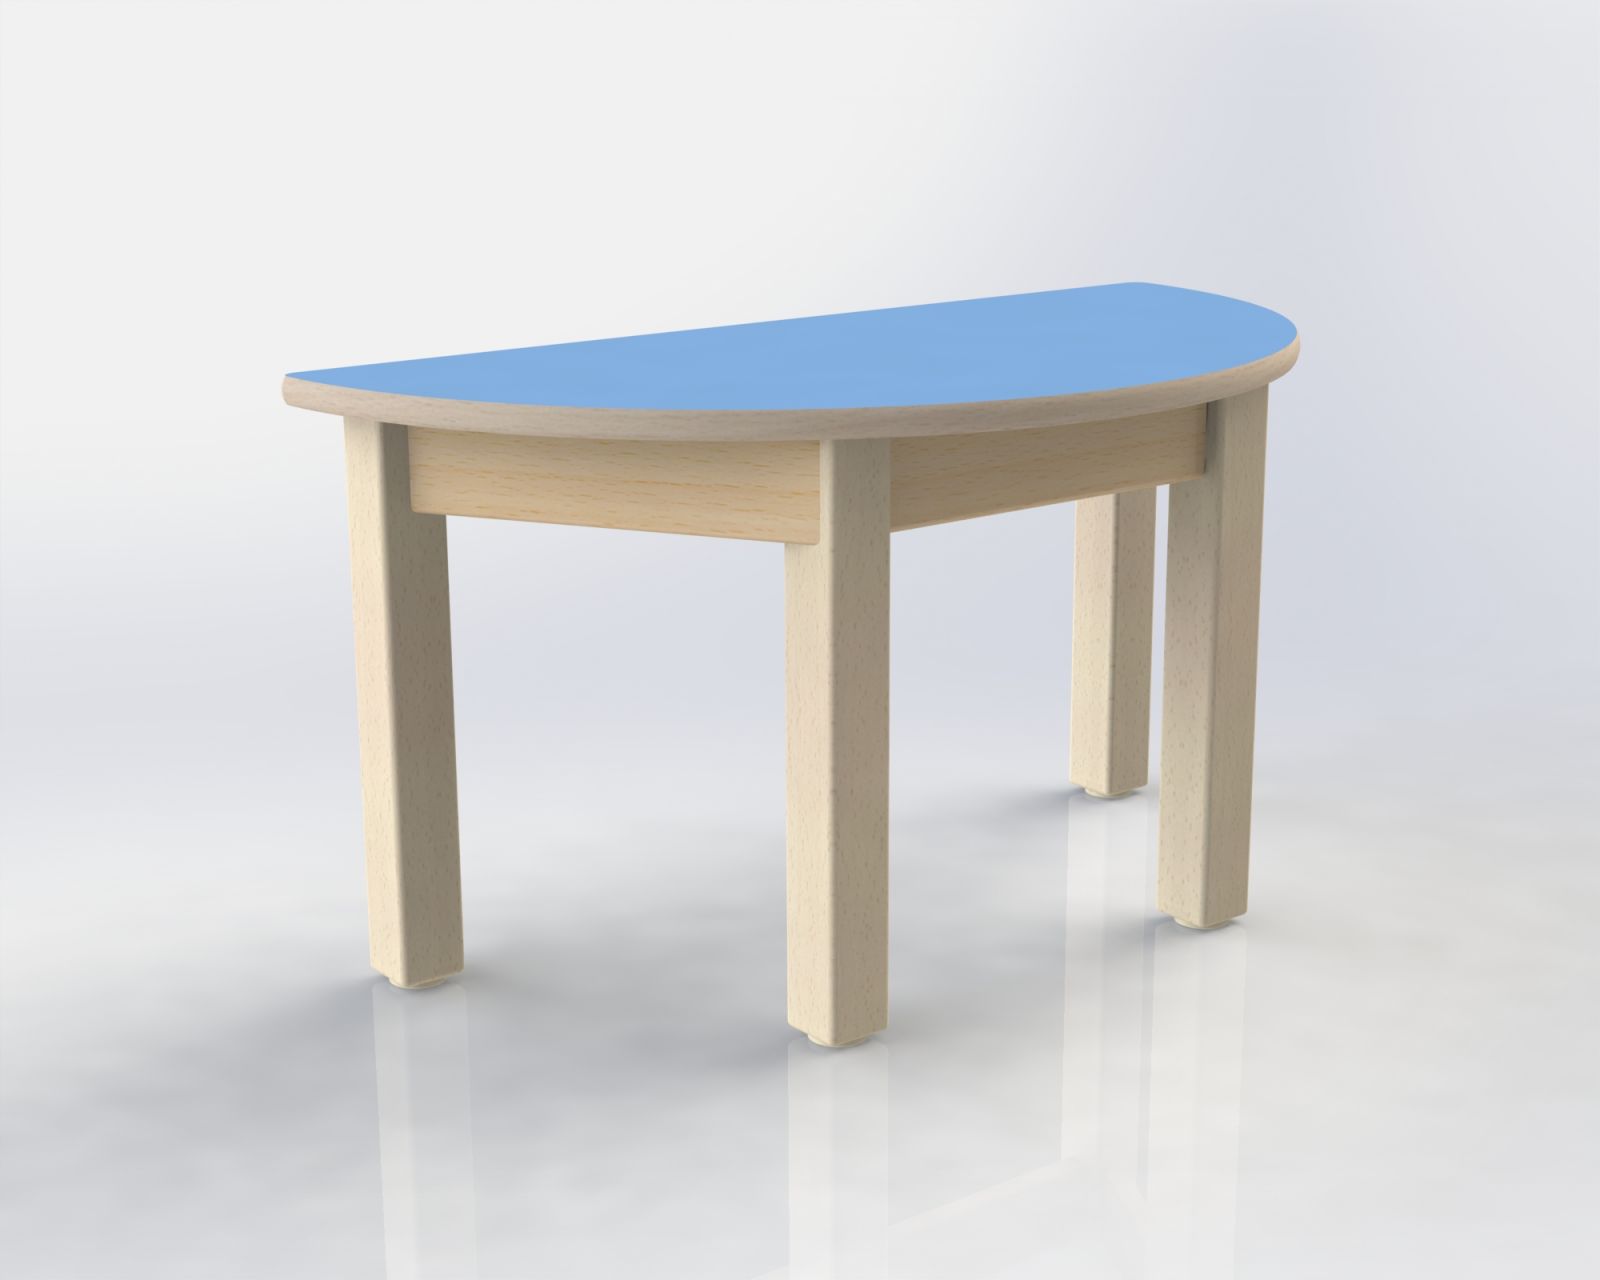 Halfround table 80 x 40 cm with formica table top